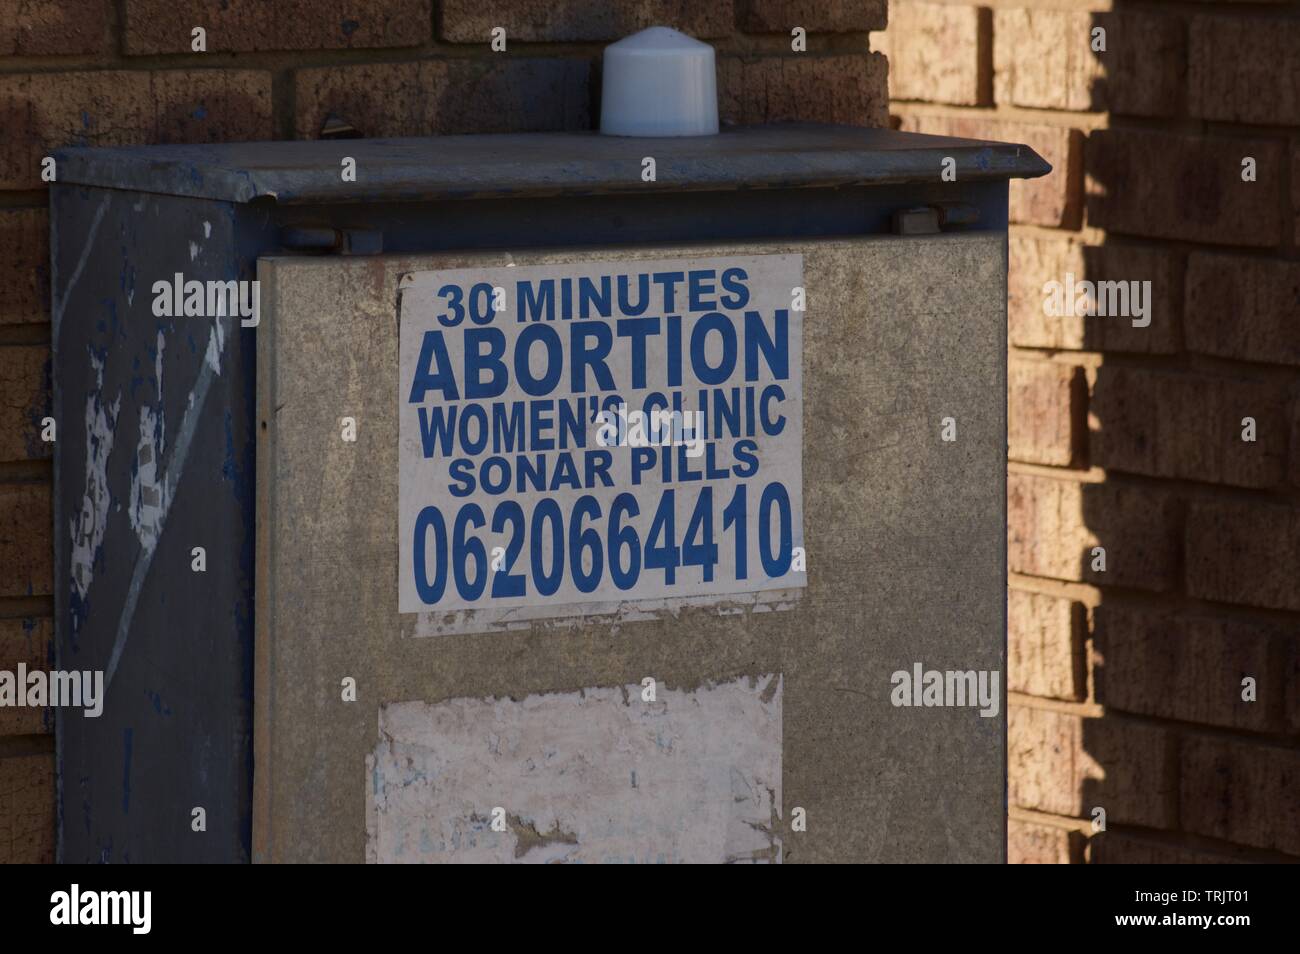 Quick abortion services advert in Johannesburg Stock Photo